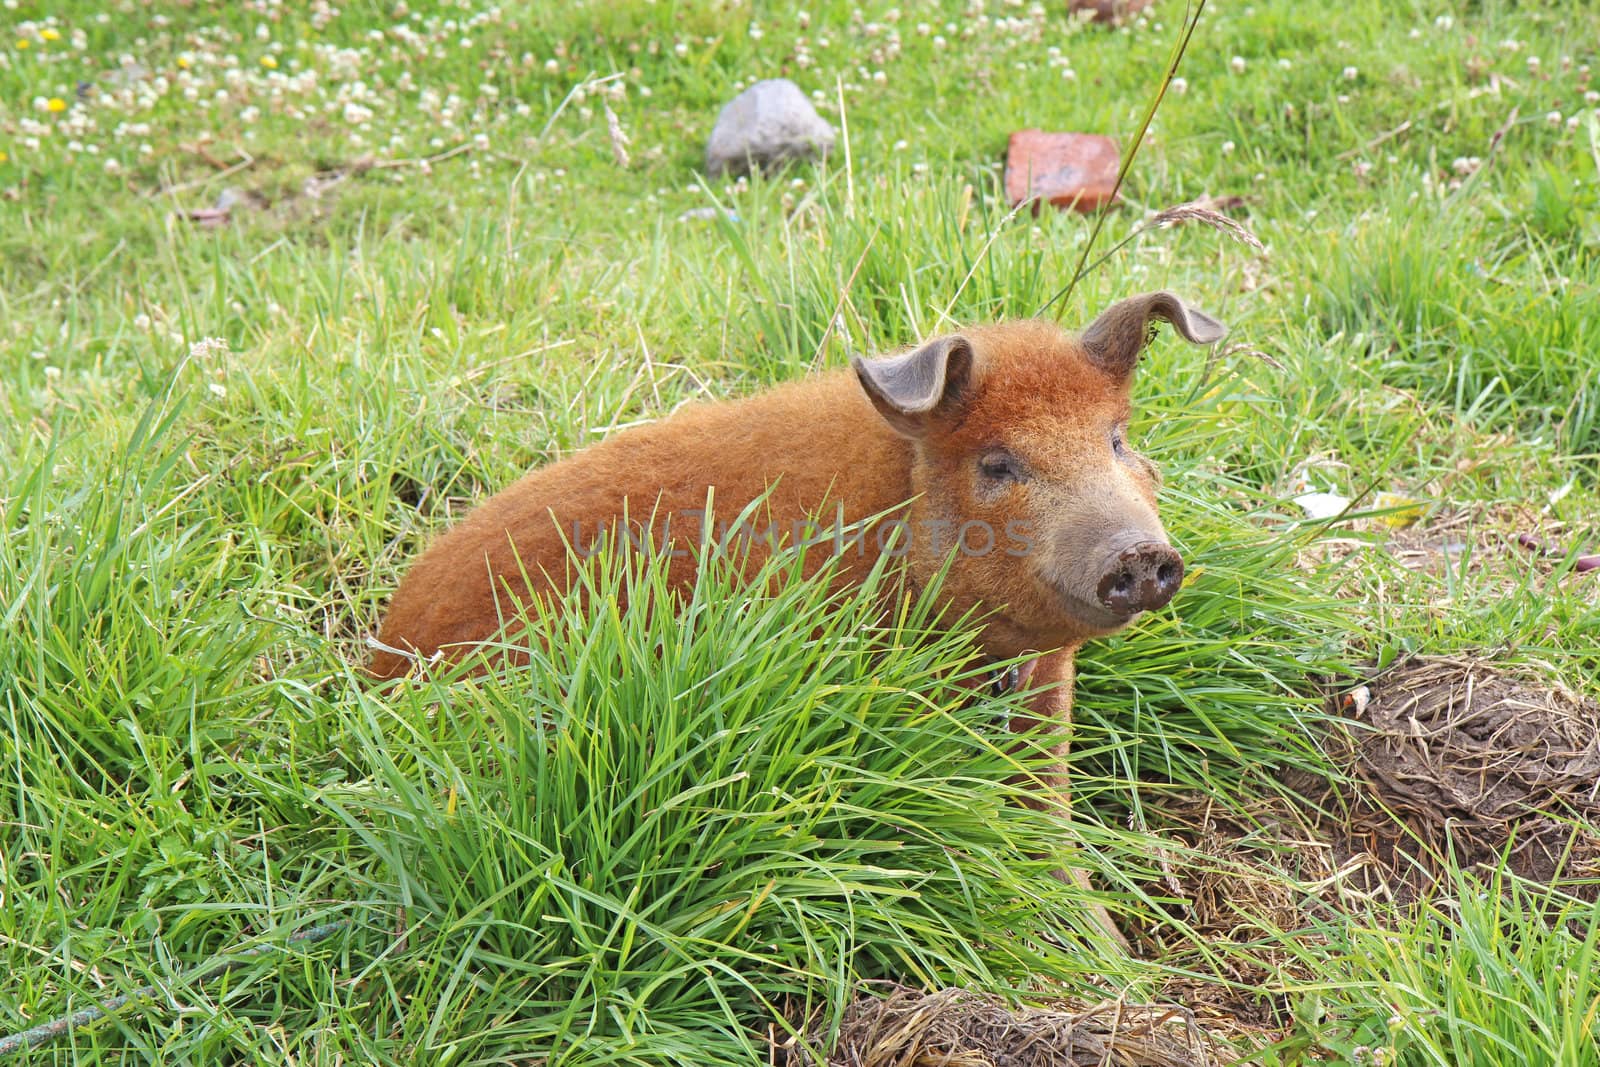 Live domestic pig in Ecuador by sgoodwin4813